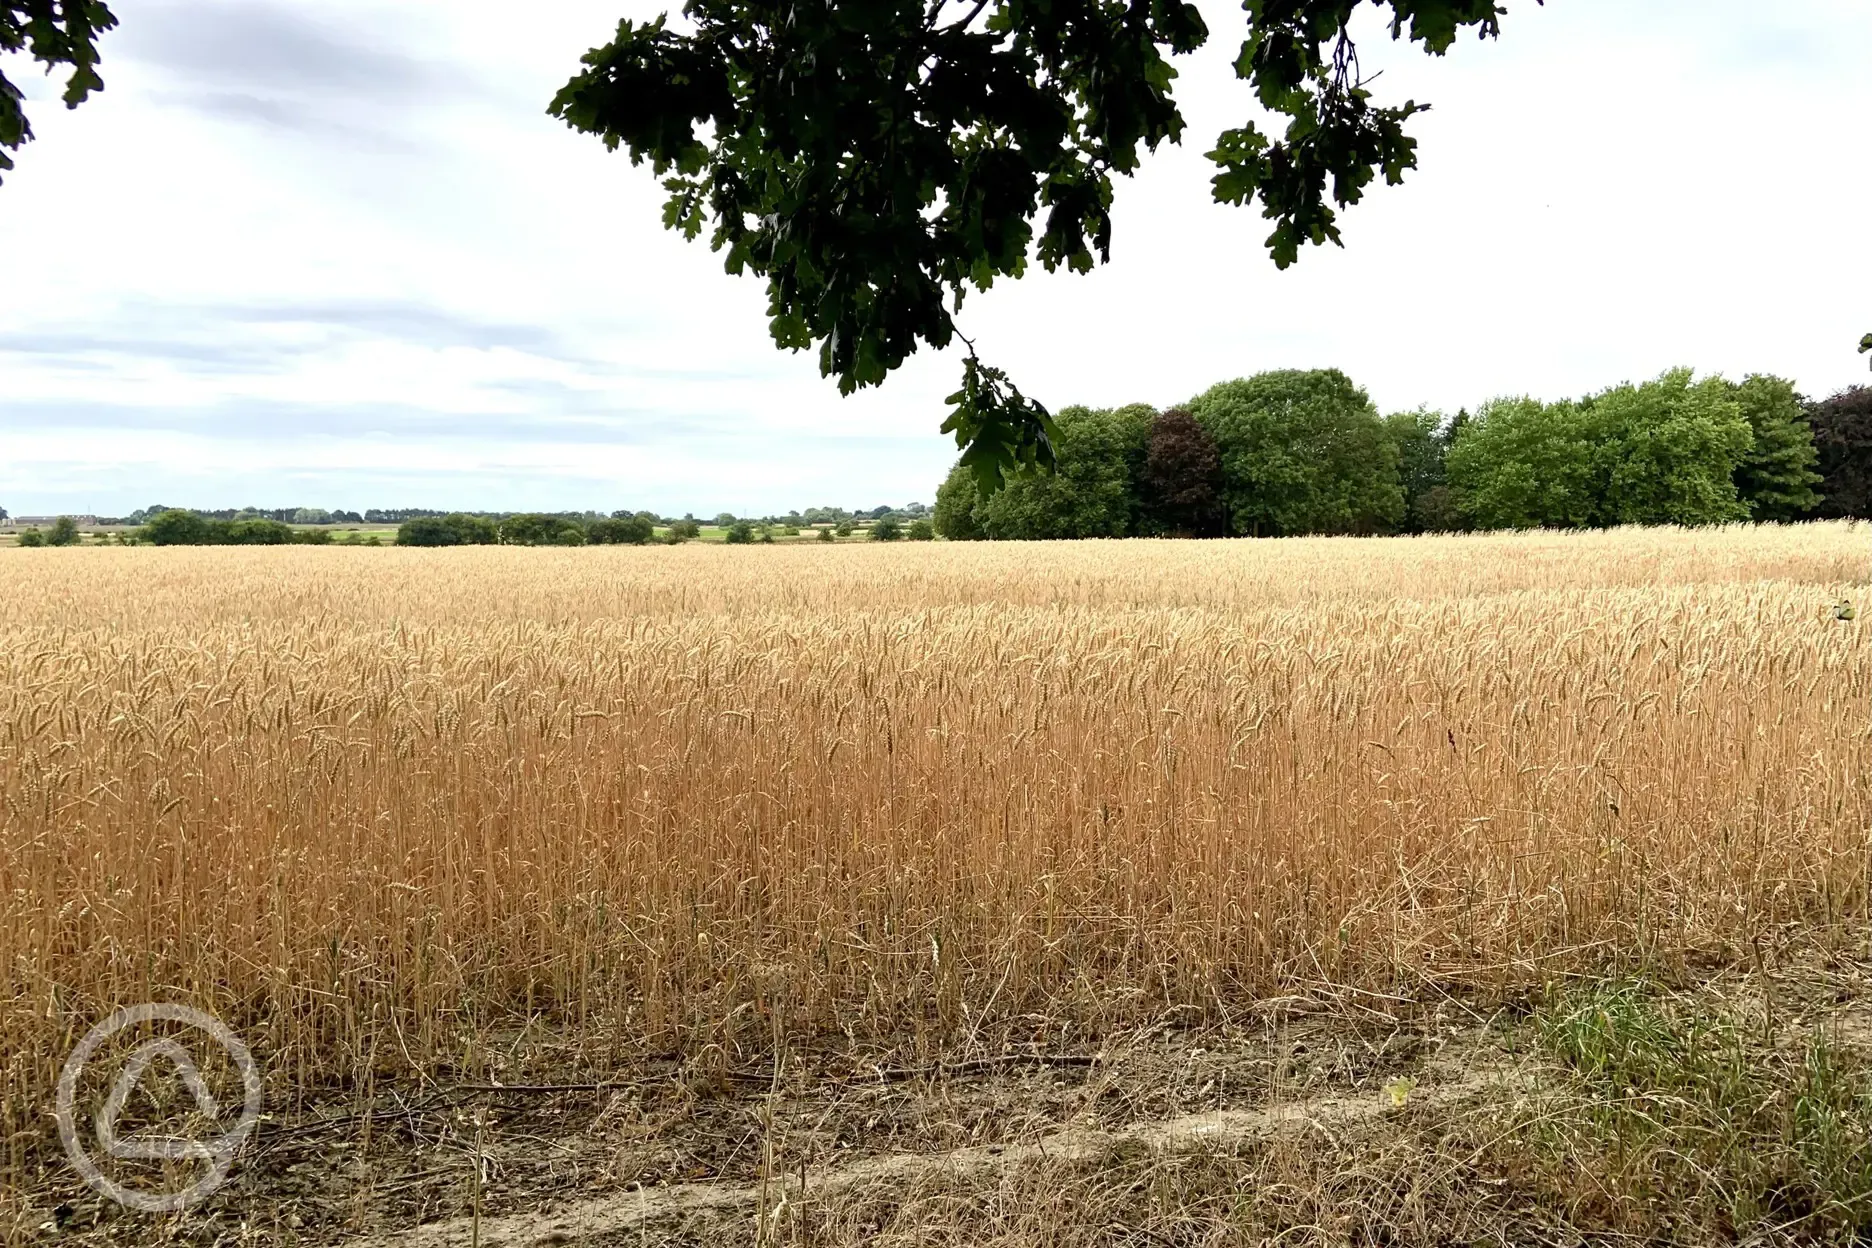 Across the wheat field beyond our site